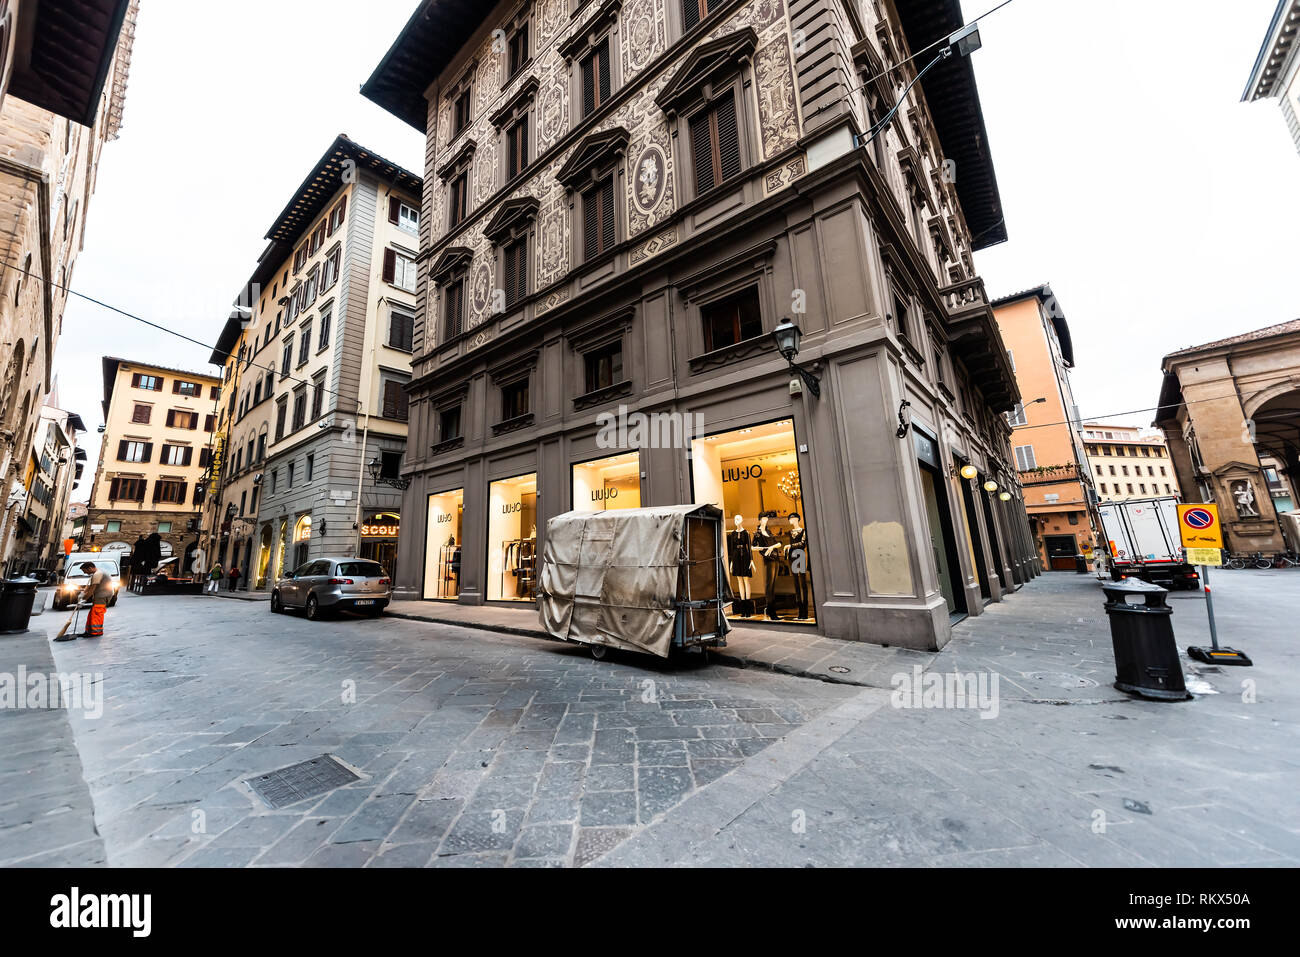 Florence, Italy - August 31, 2018: Liu Jo storefront building facade of shop store in Firenze, Italian city with sign and architecture in morning Stock Photo